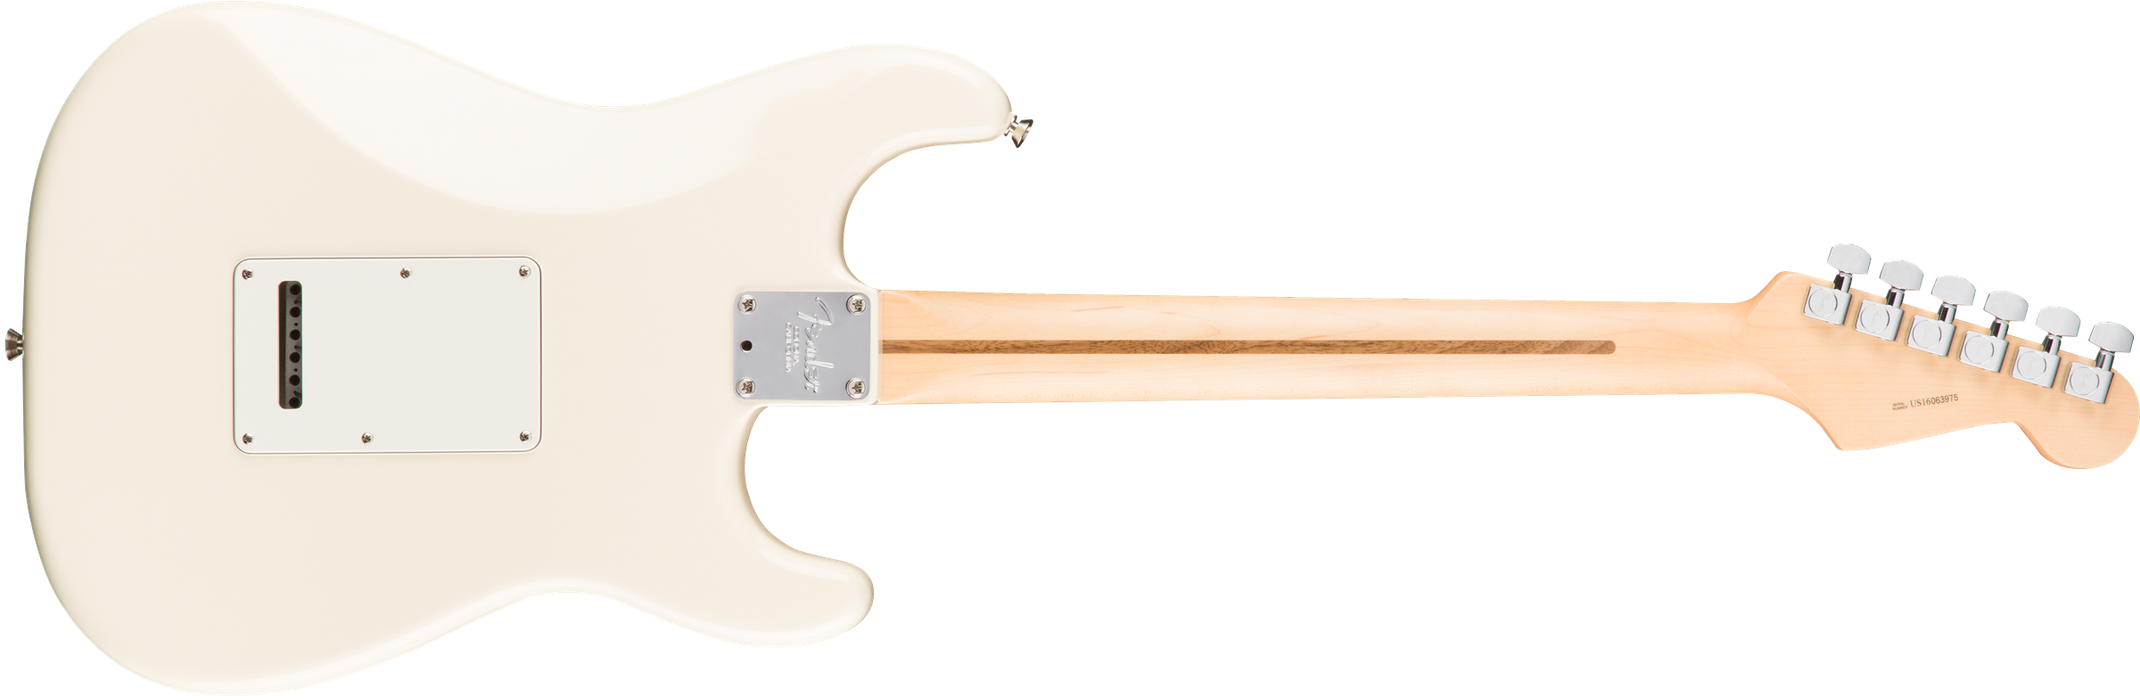 DISC - Fender American Professional Maple Neck Stratocaster Left-Handed - Olympic White